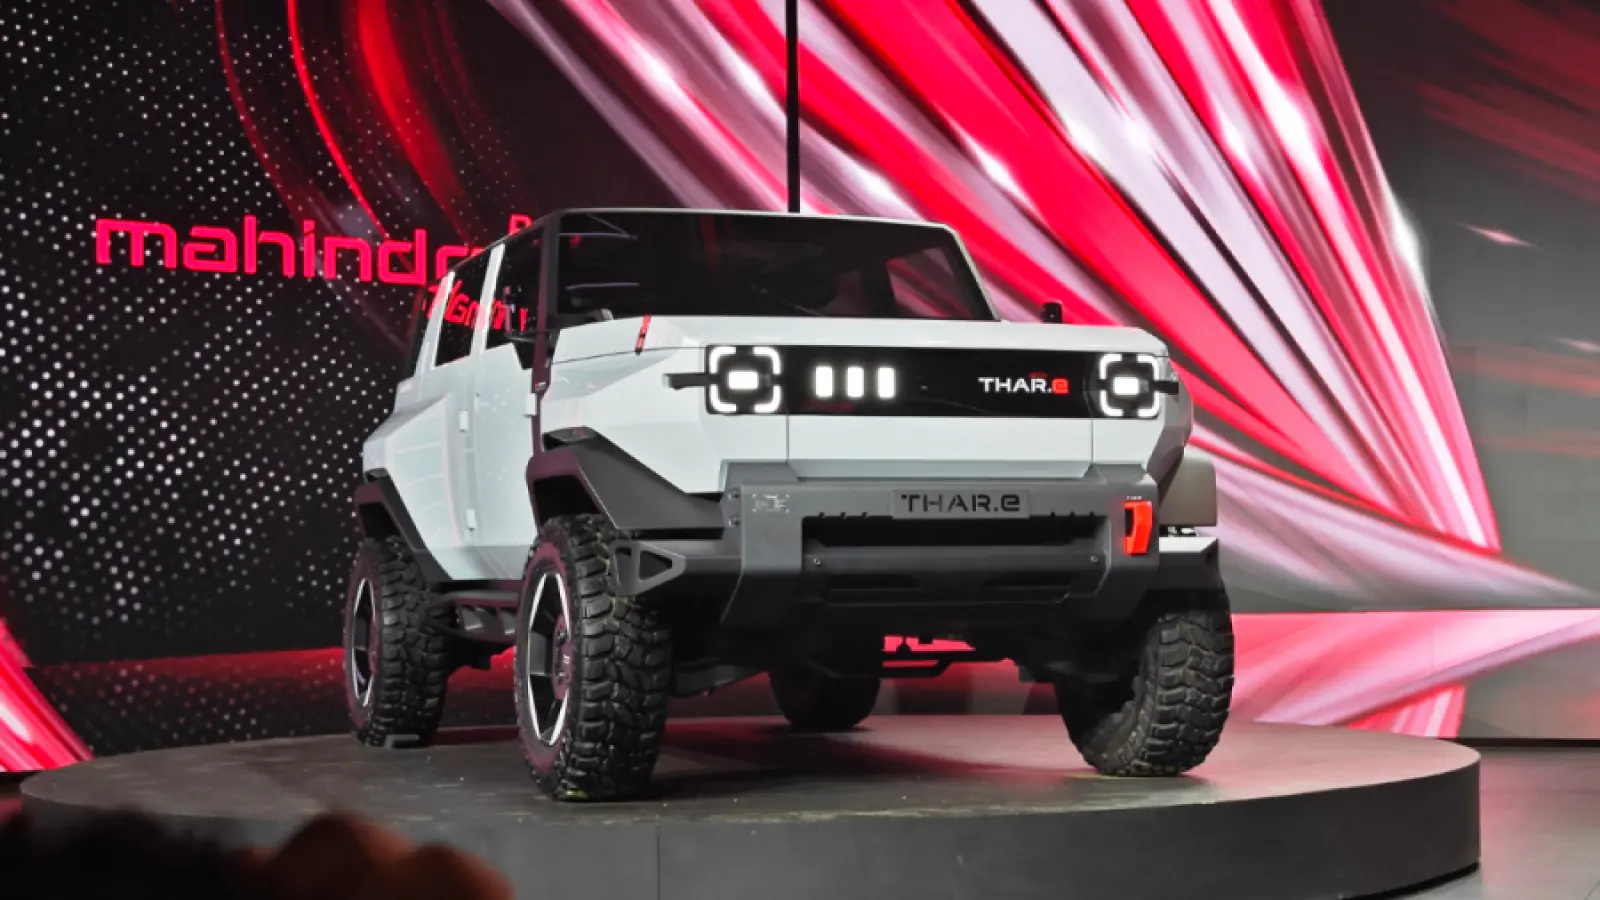 Mahindra Thar will create a stir in electric avatar, will get 450 km range and top class features